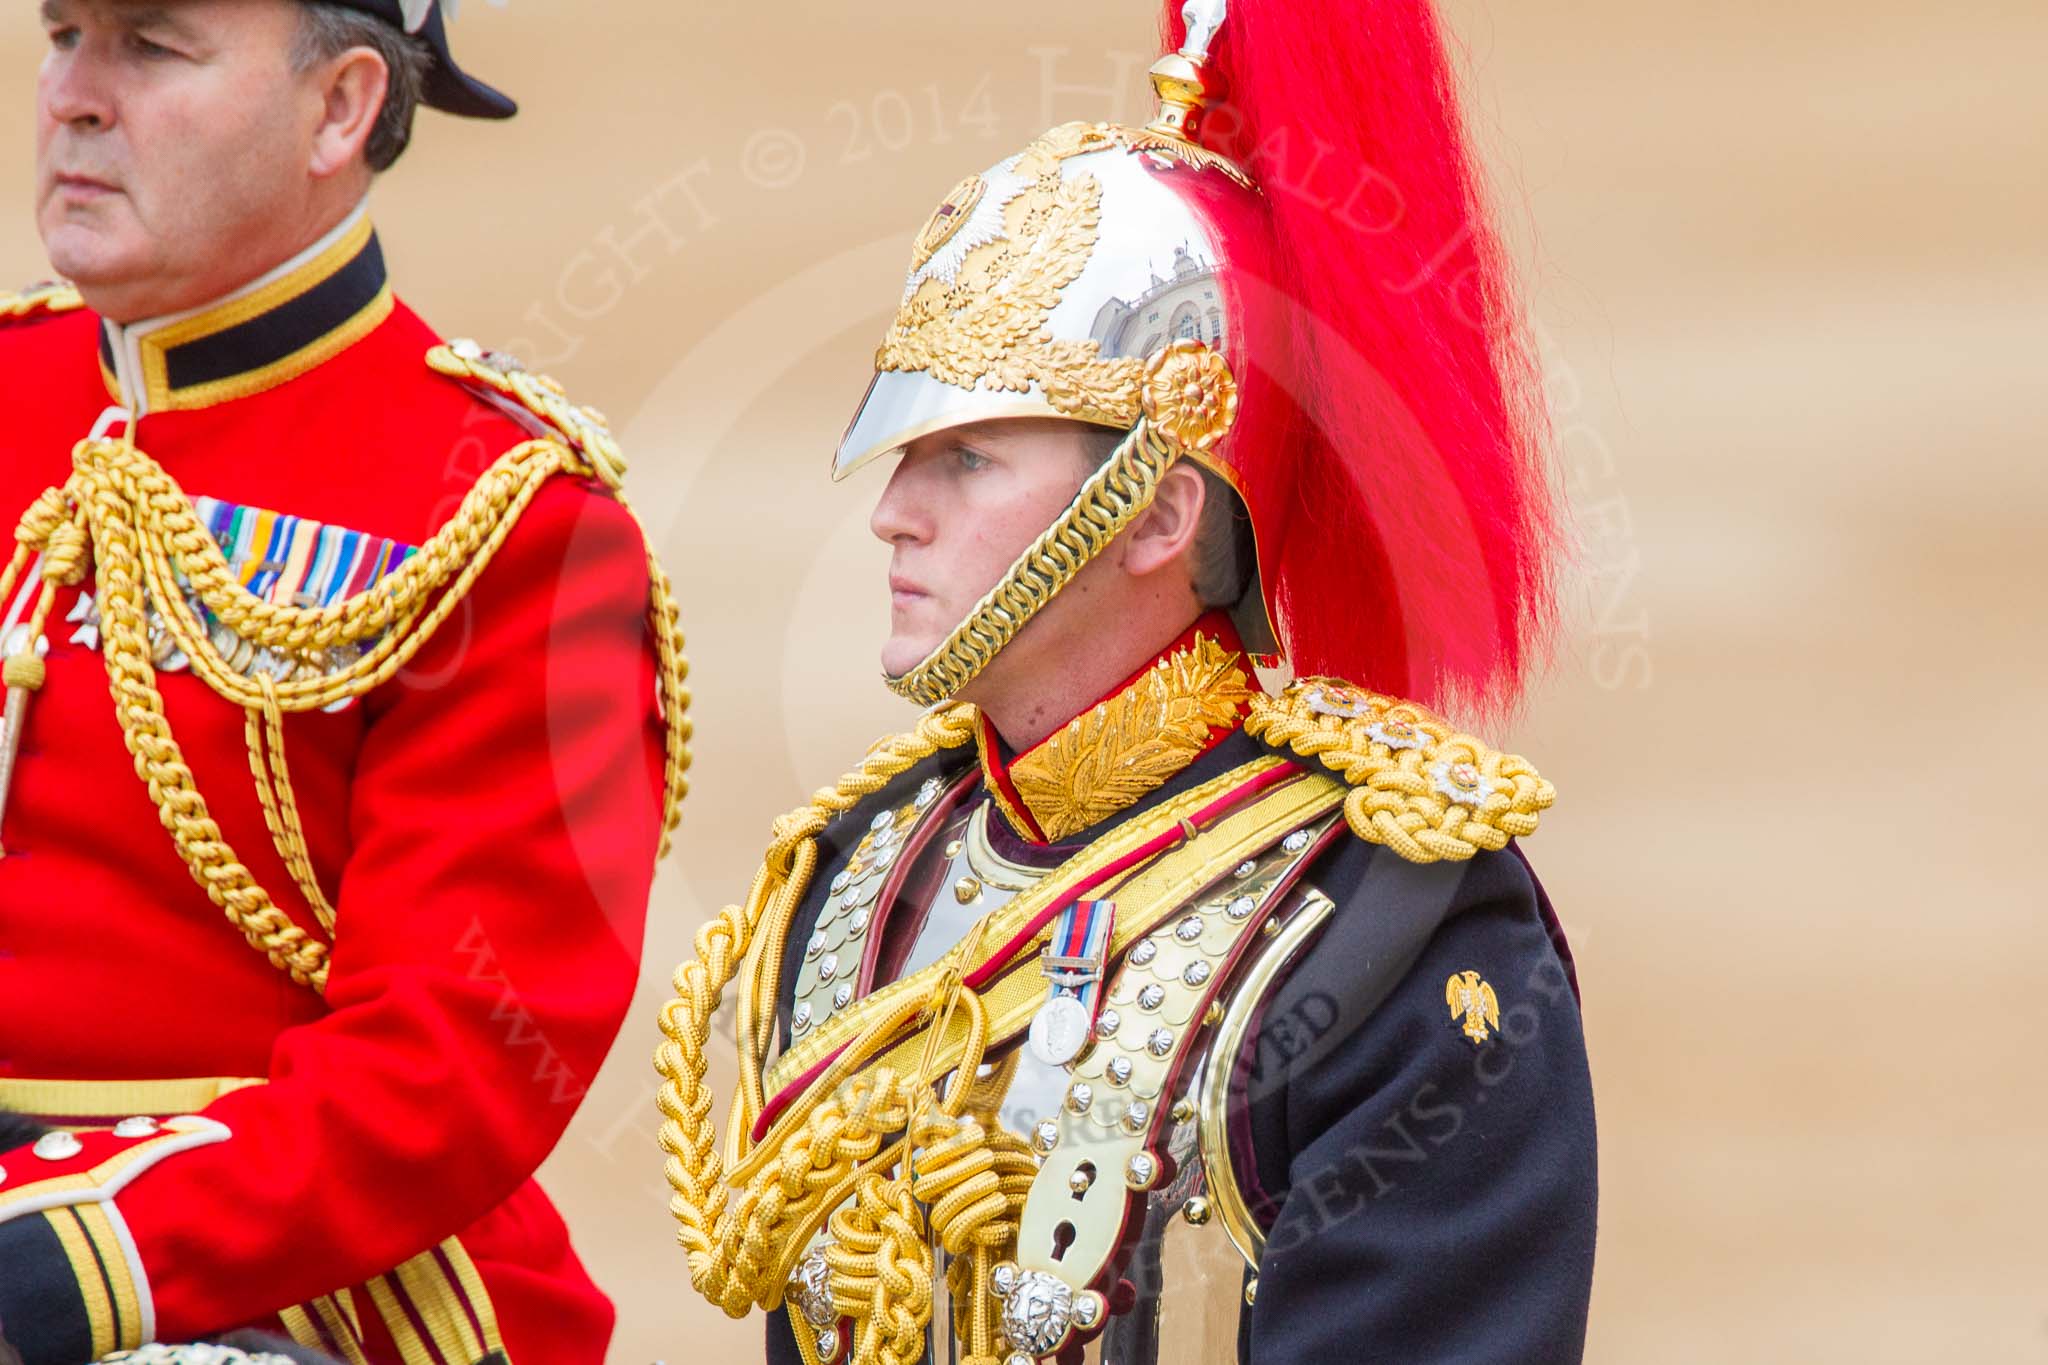 Trooping the Colour 2014.
Horse Guards Parade, Westminster,
London SW1A,

United Kingdom,
on 14 June 2014 at 11:03, image #398